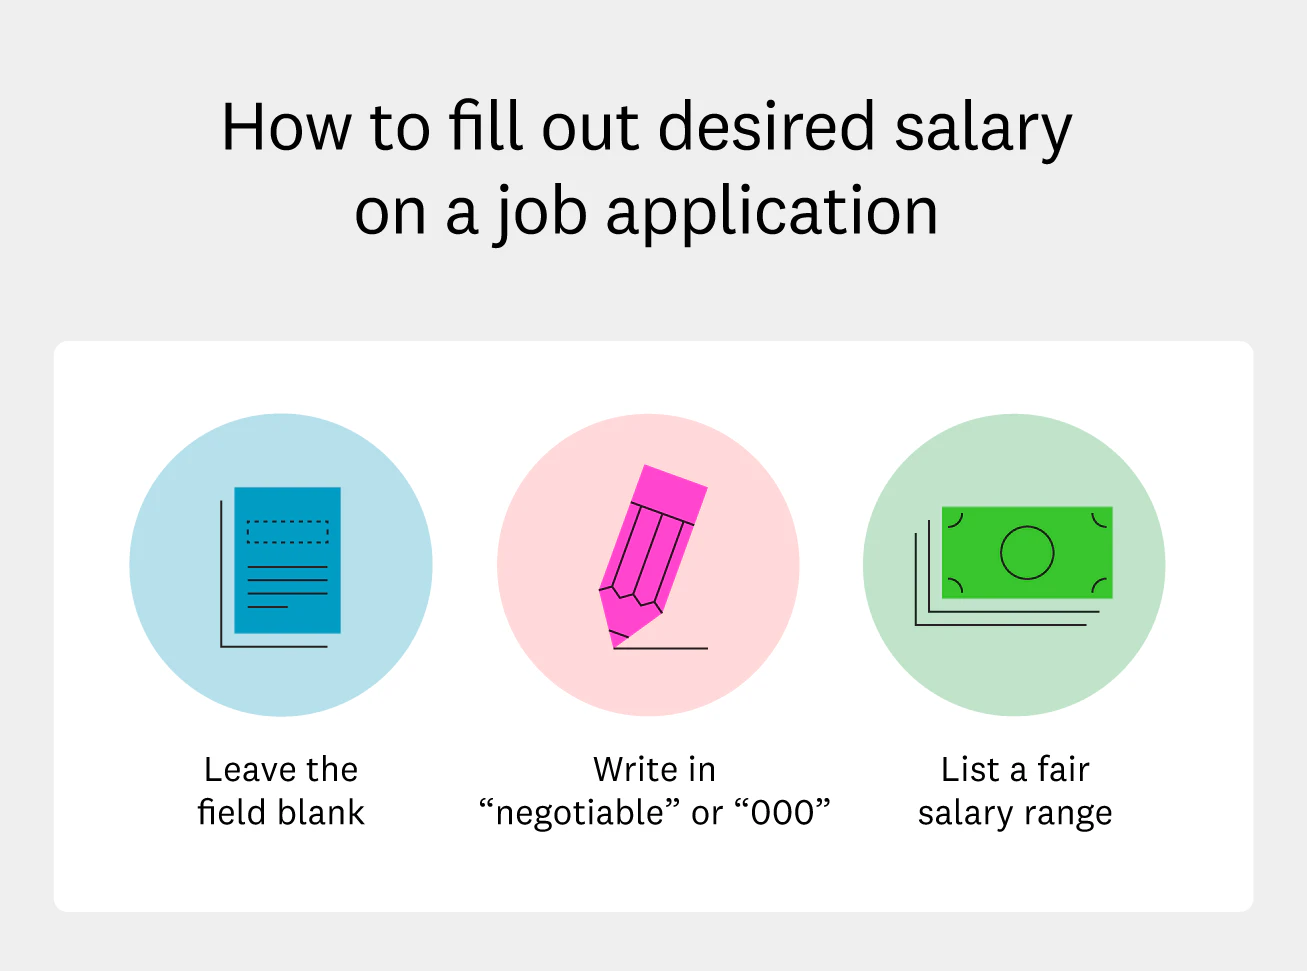 How to fill out desired salary